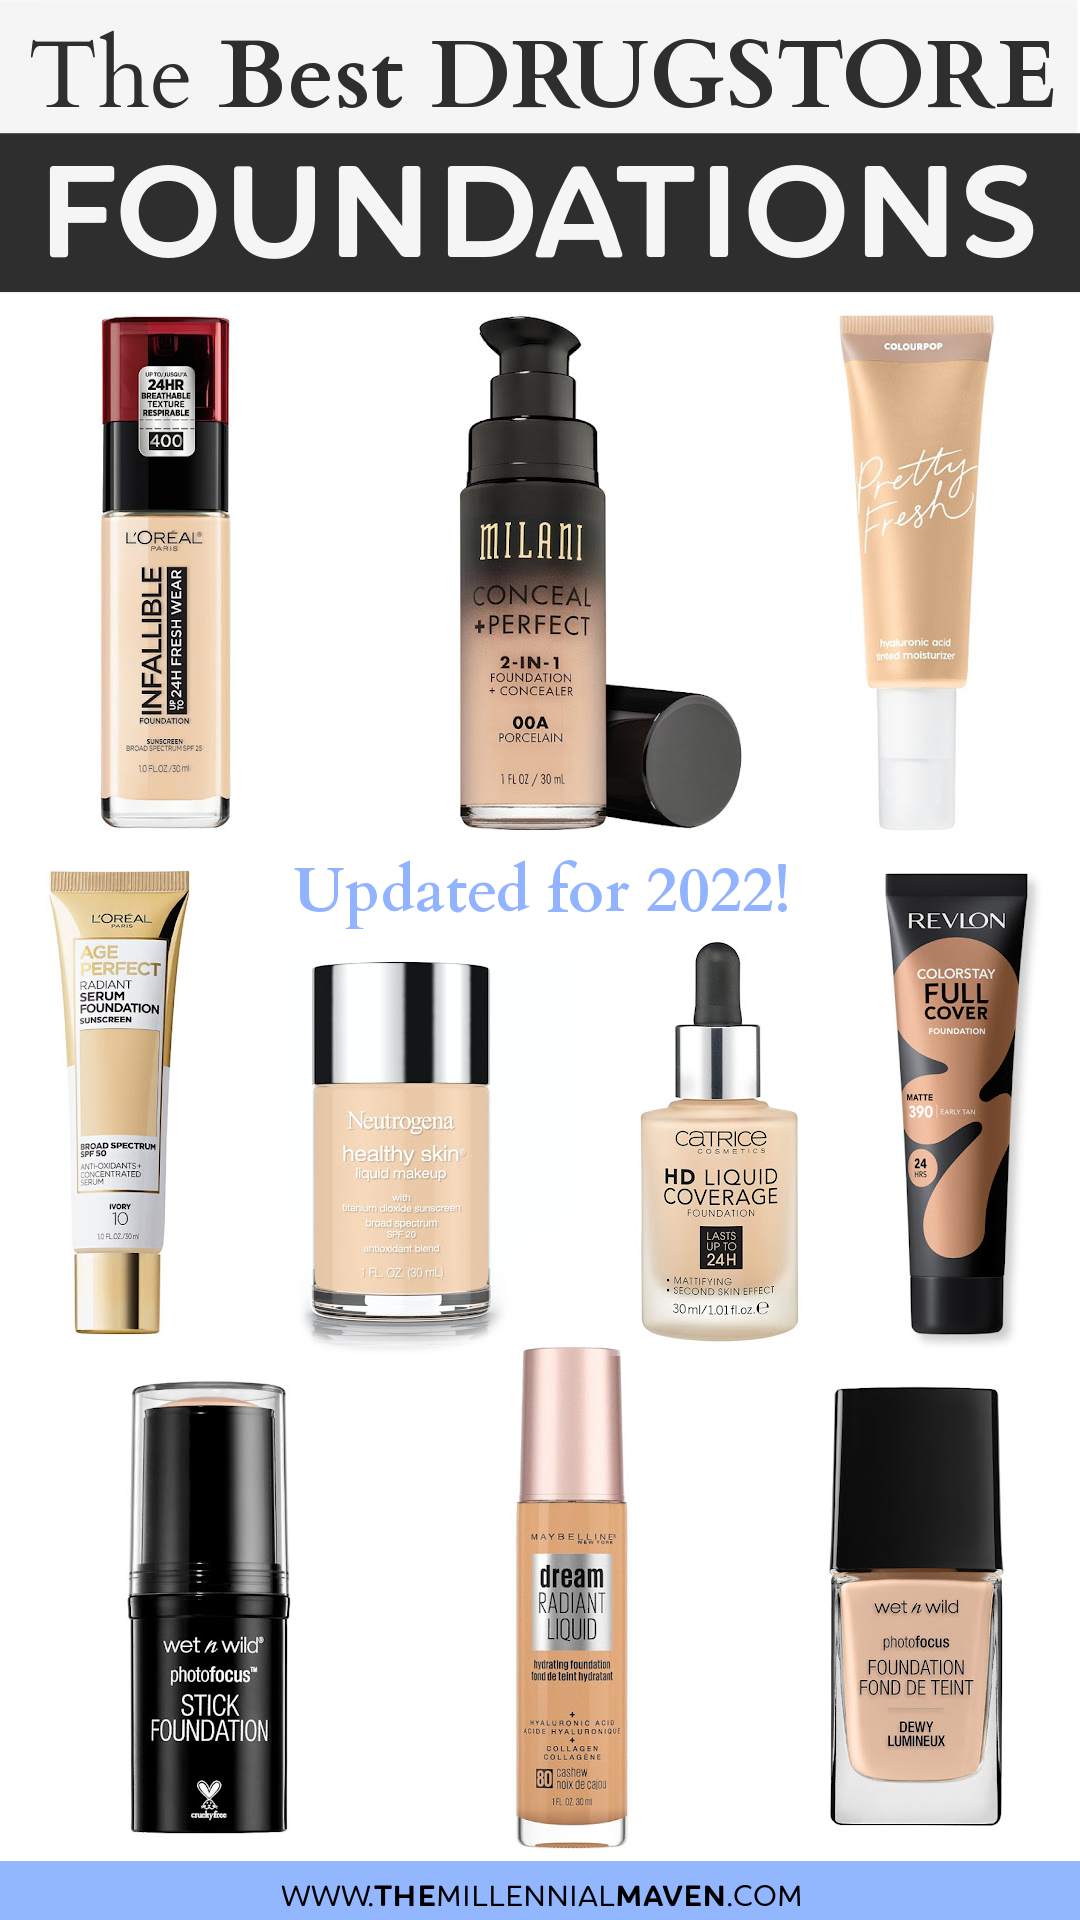 Top 10 Best Foundations at the Drugstore in 2022! | Best Drugstore Foundations